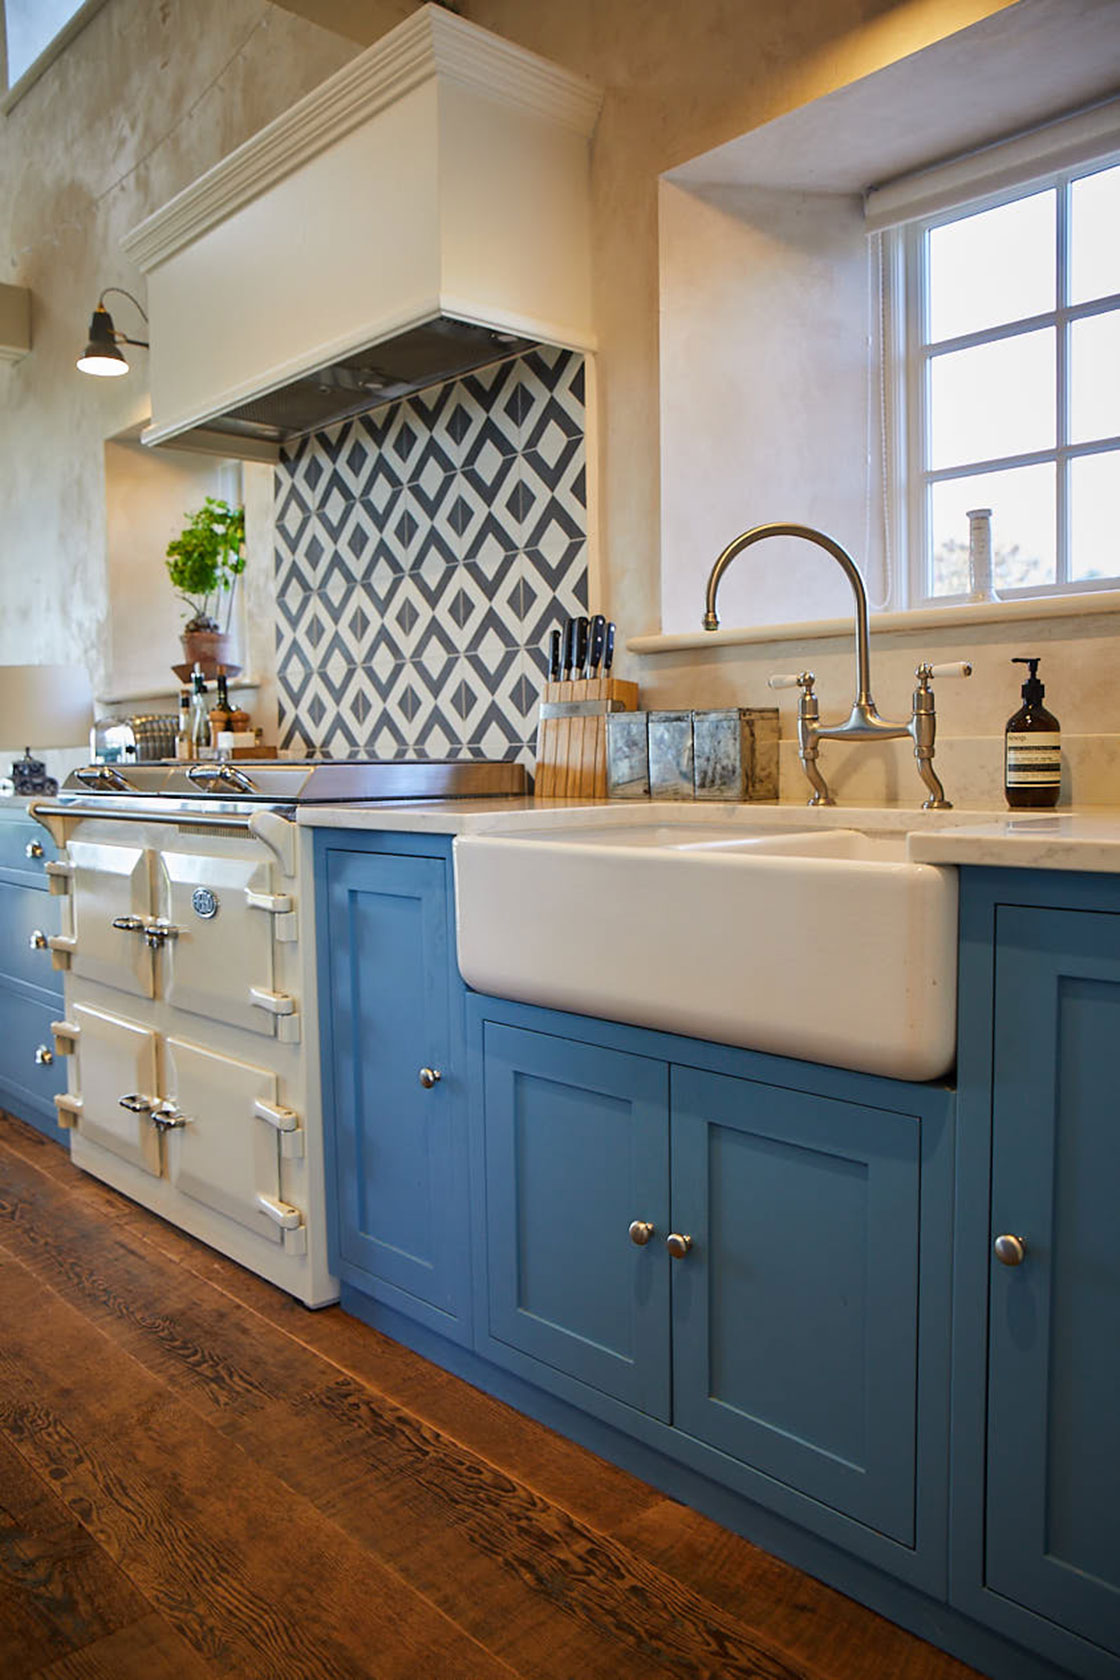 Bespoke light blue shaker kitchen cabinets with reclaimed pine wood floor